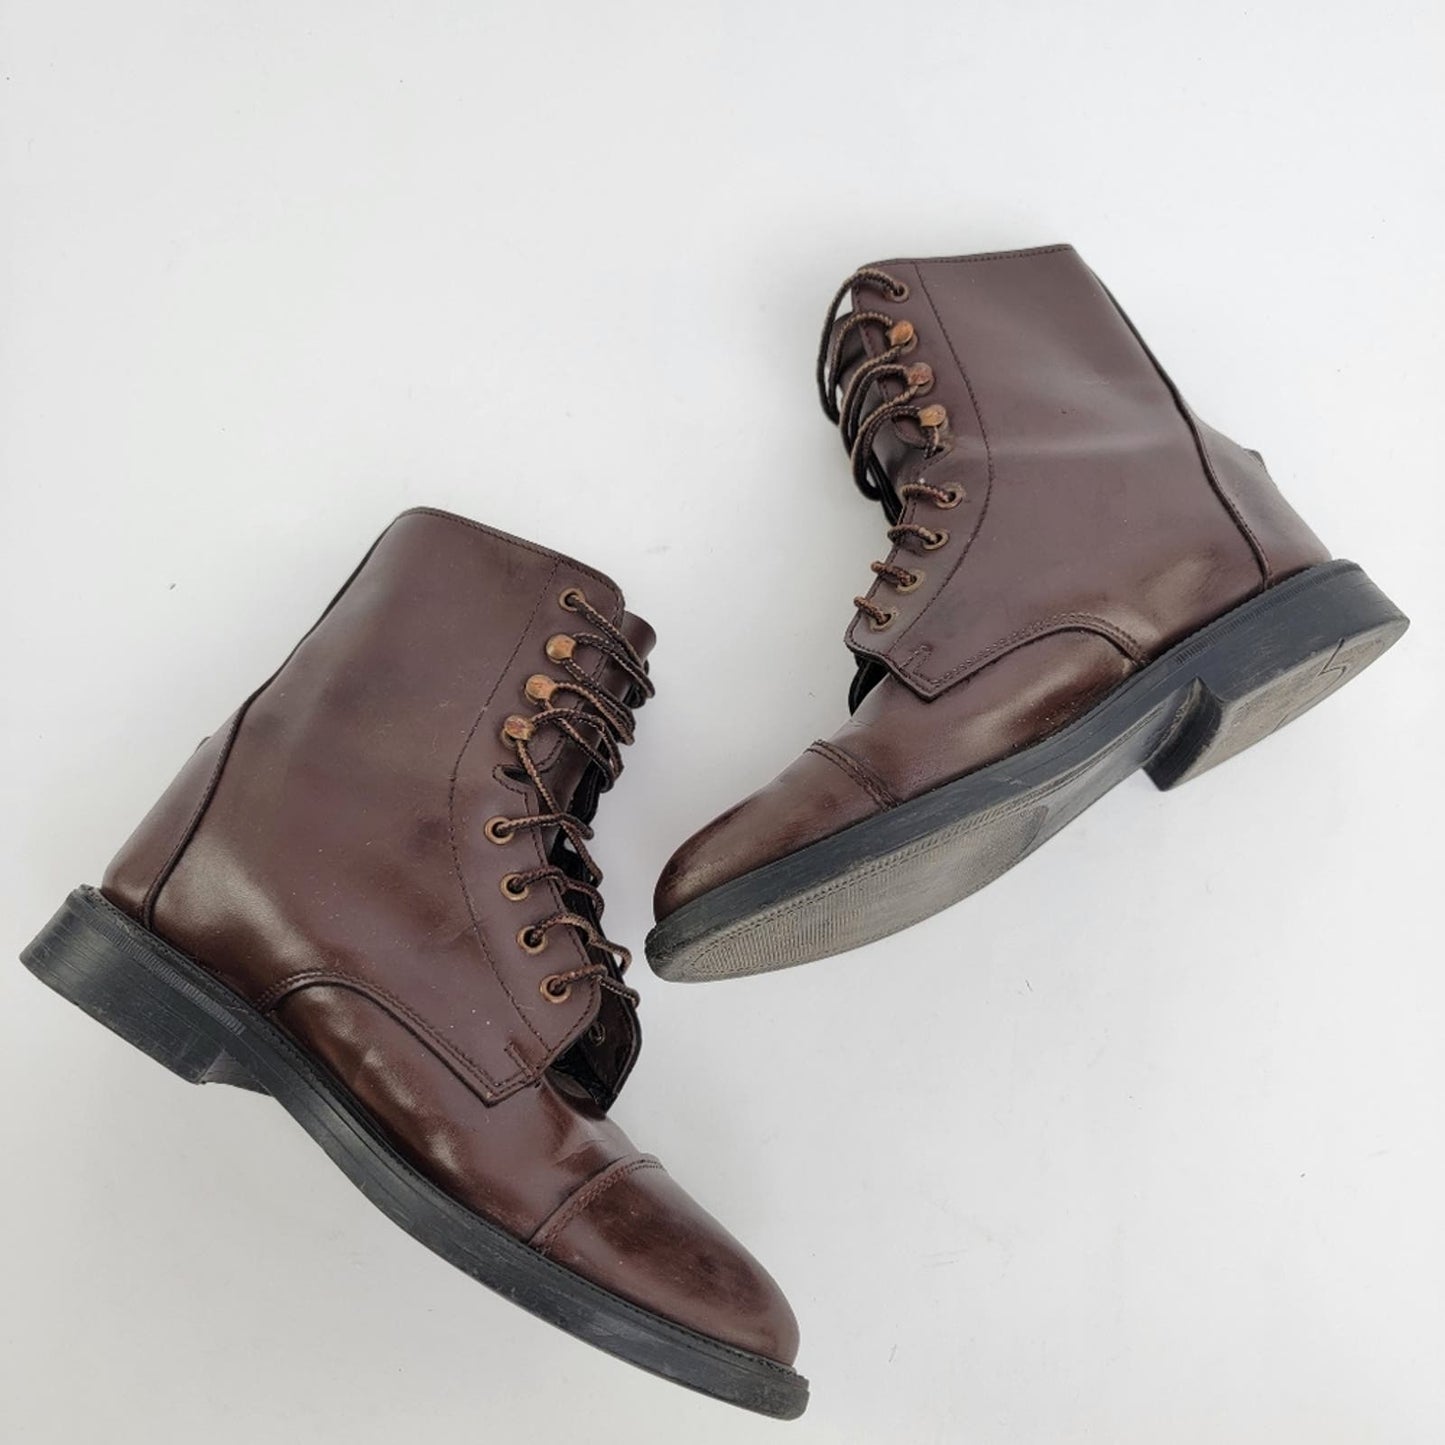 Vintage 90s Brown Leather Capped Toe Cottage Boots - 6